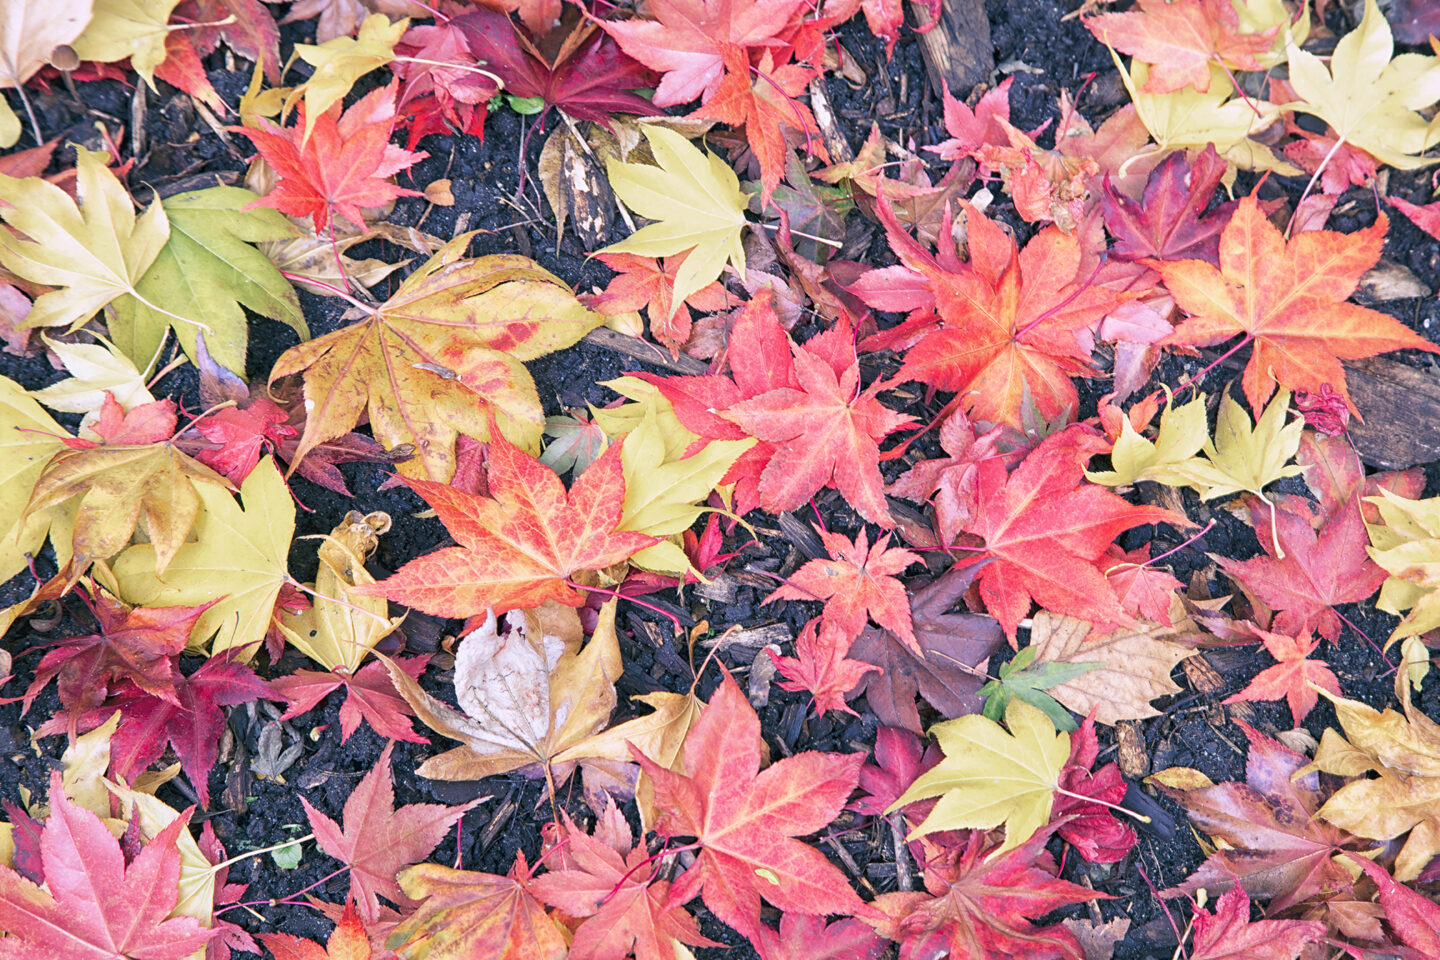 Autumn leaves on the ground, maple leaves as photographed by Carol Schiraldi of Carol's Little World. 